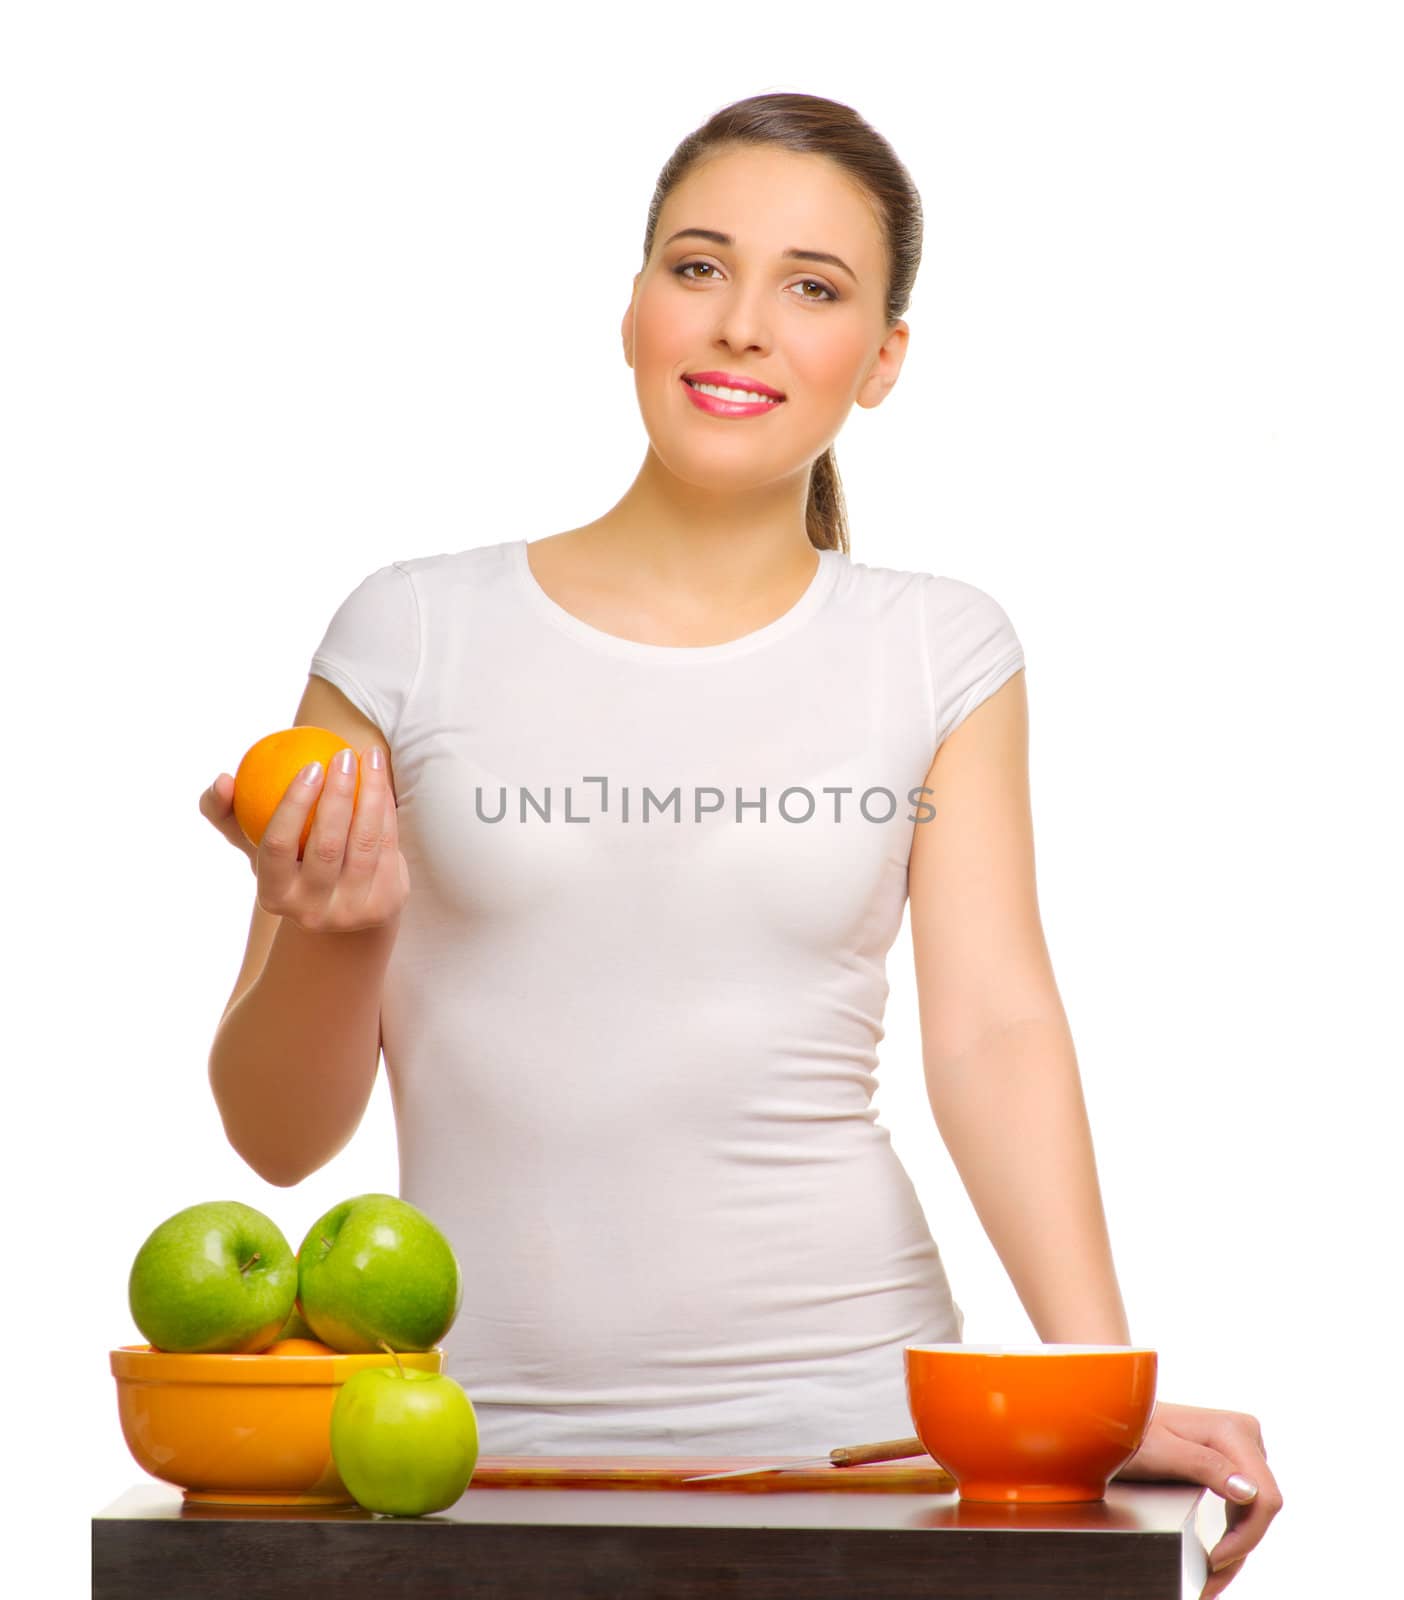 Young woman with fruits isolated